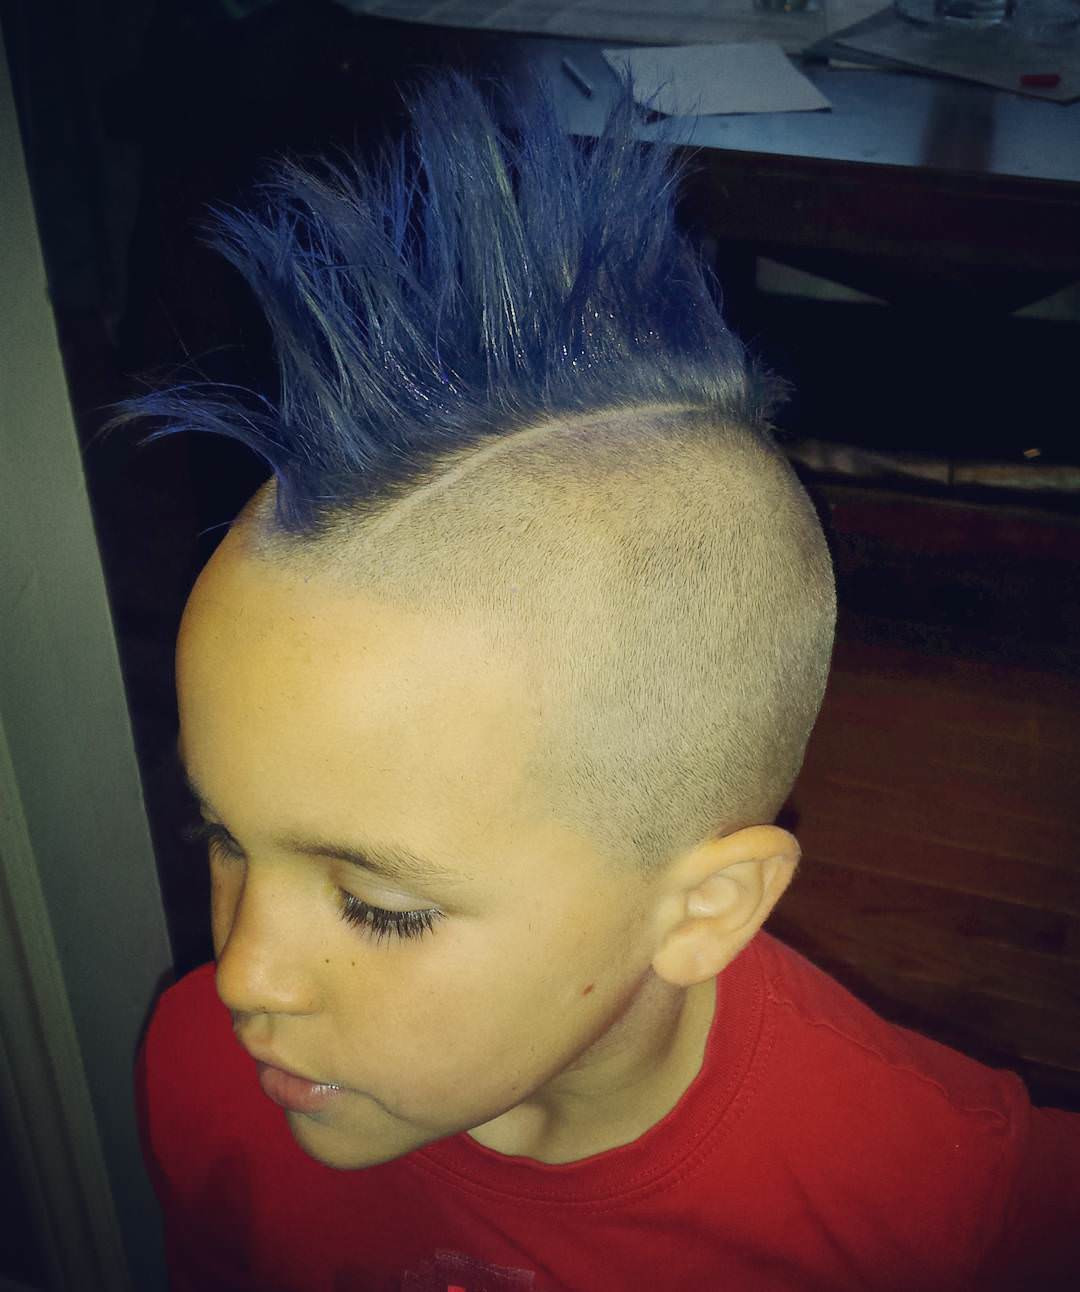 Mohawk Hairstyles For Kids
 26 Edgy Mohawks Hairstyles For Kids